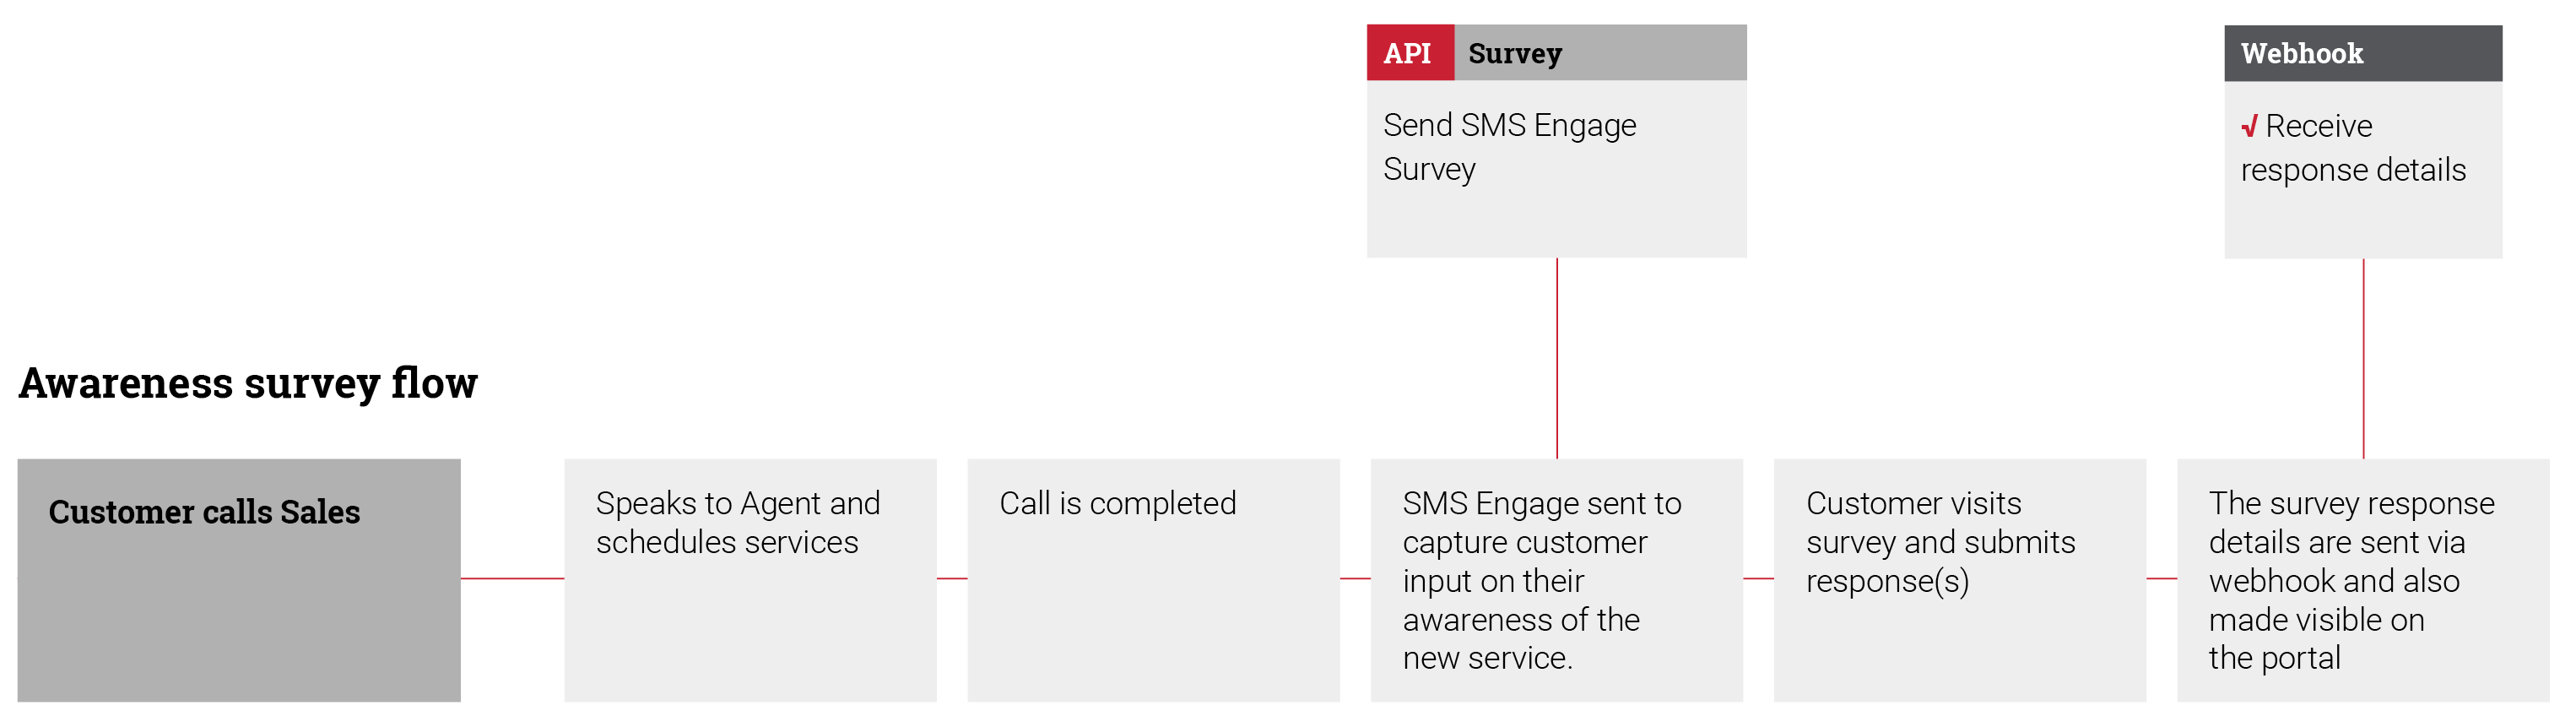 8x8_SMS_Engage_Survey_Recipe_Card.png